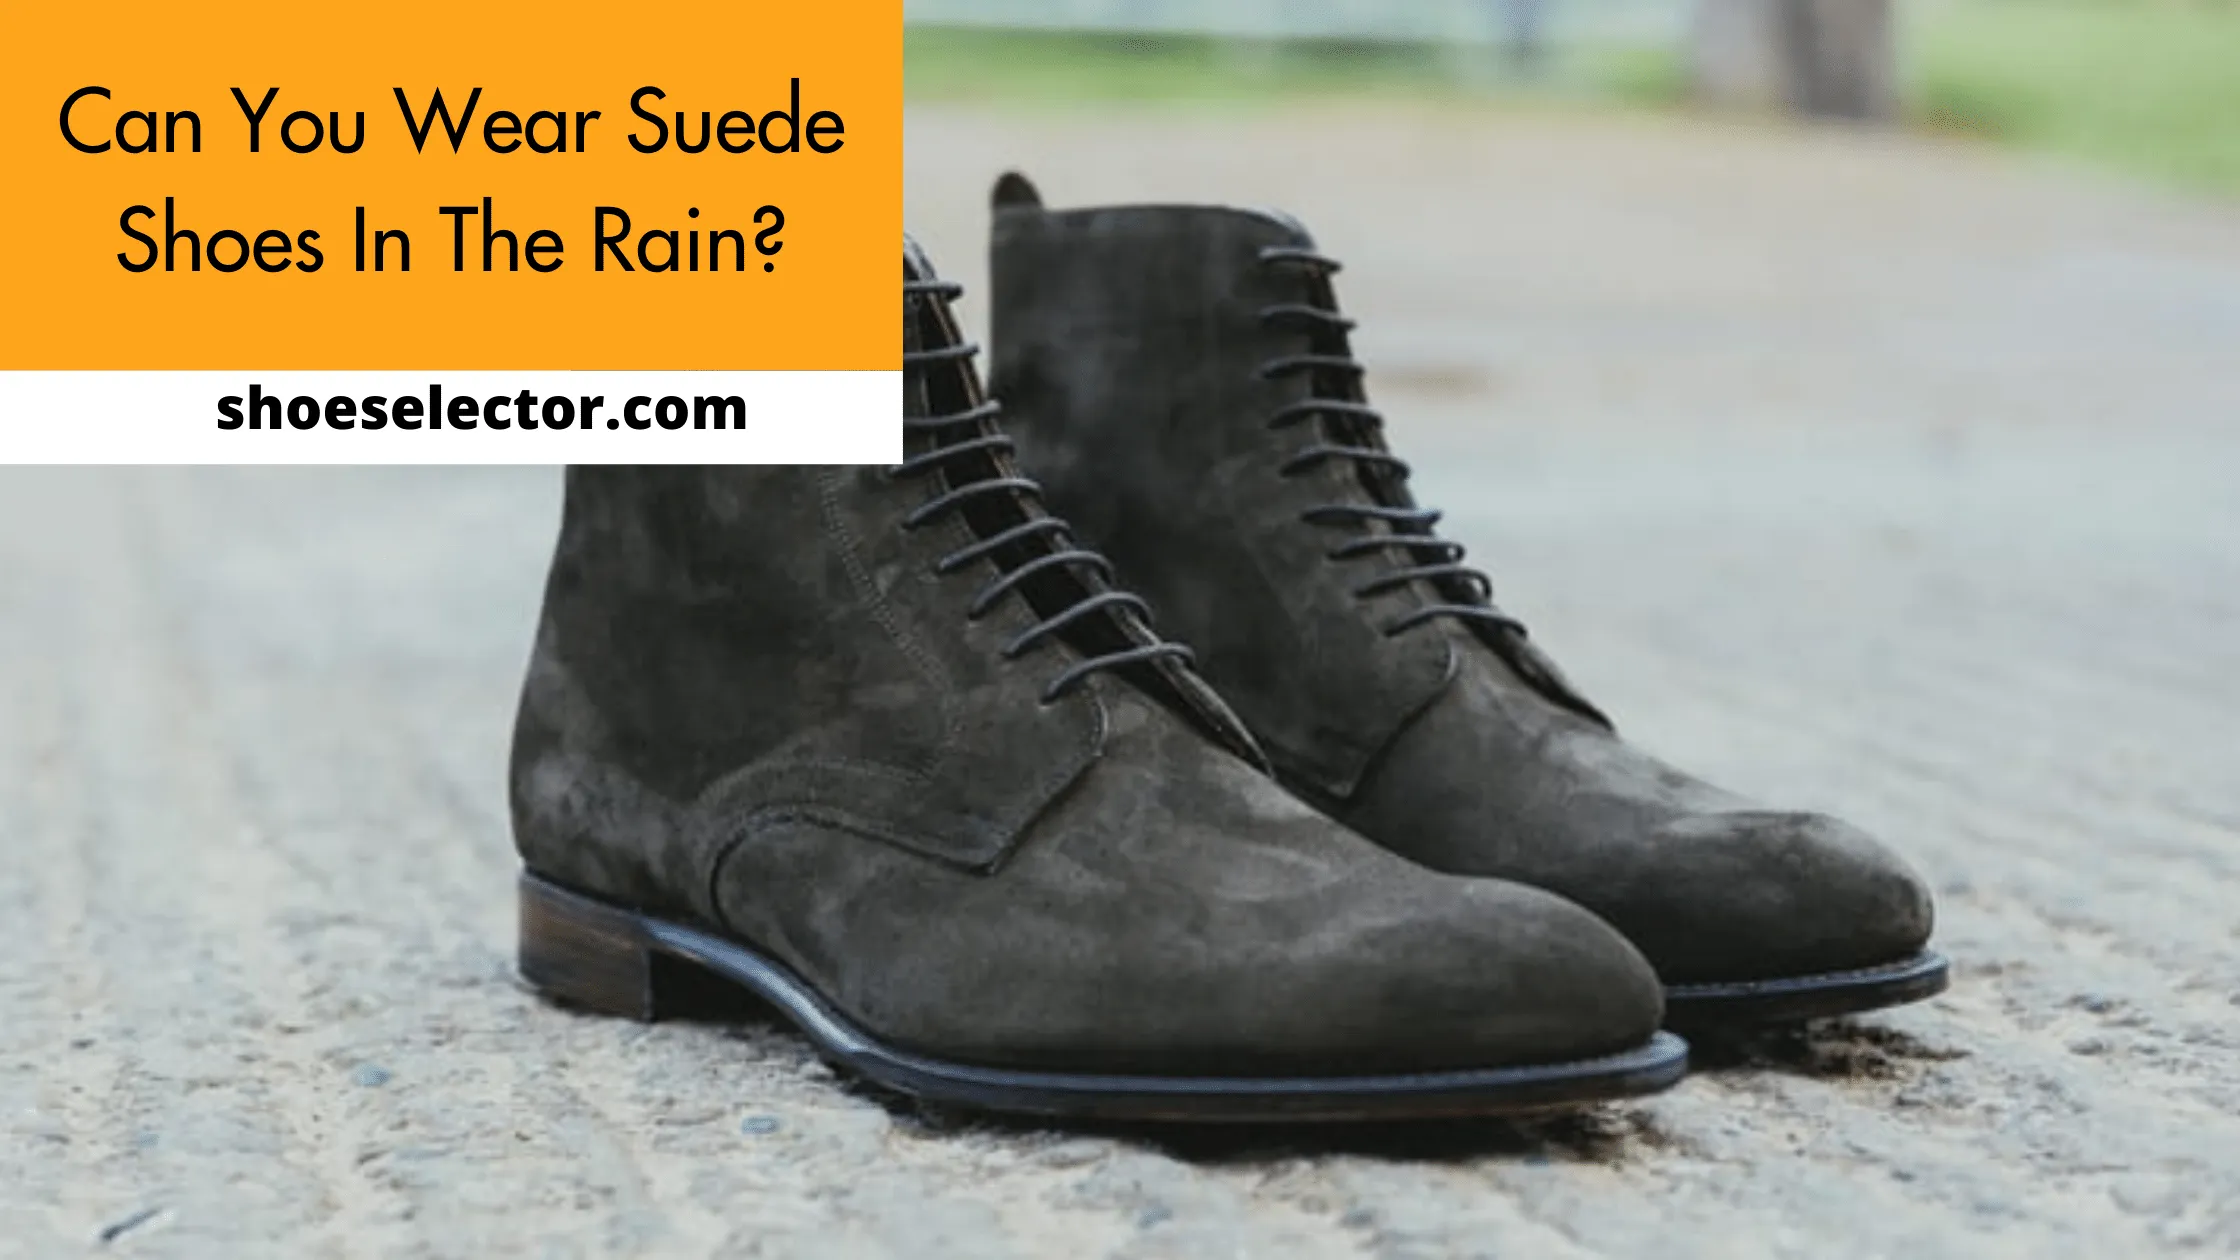 Can You Wear Suede Shoes In The Rain? - Quick Guide